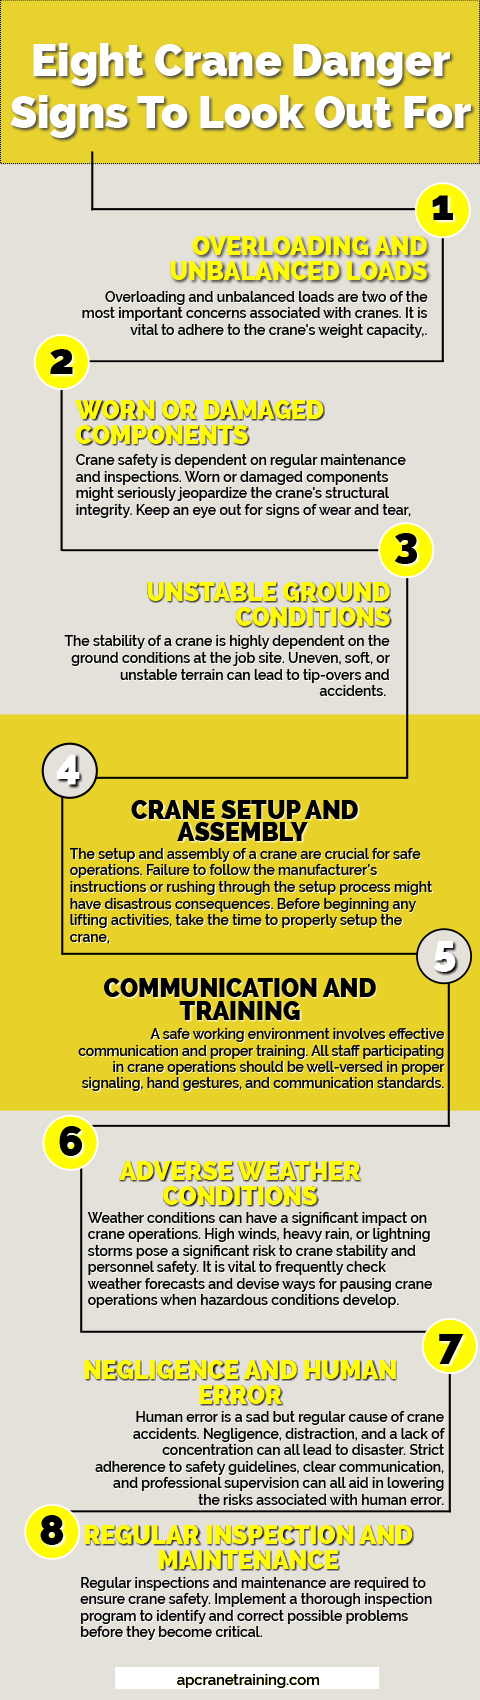 Eight Crane Danger Signs To Look Out For Infographic